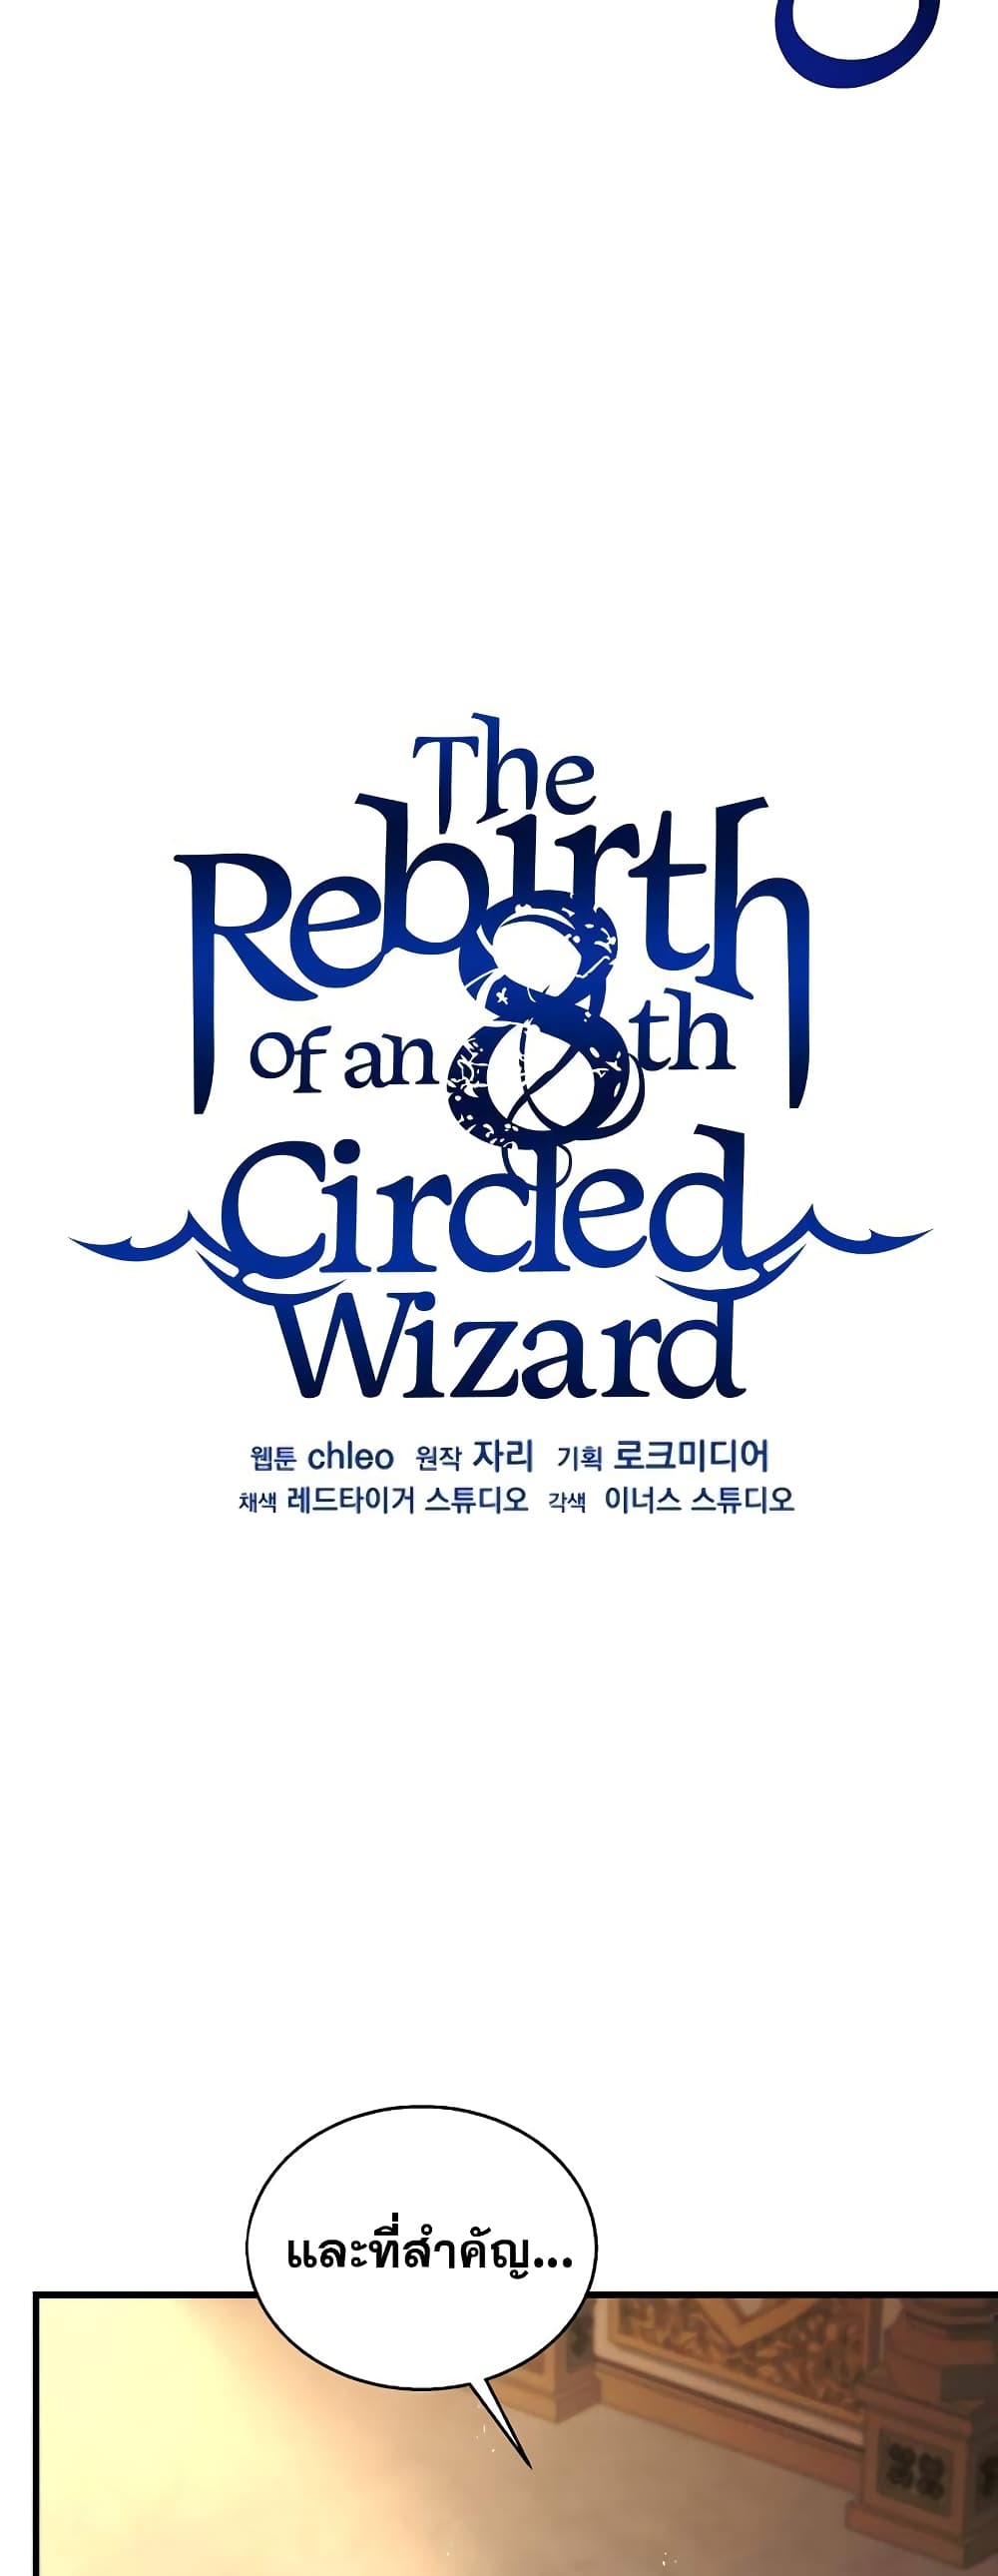 The Rebirth of an 8th Circled Wizard 124-124